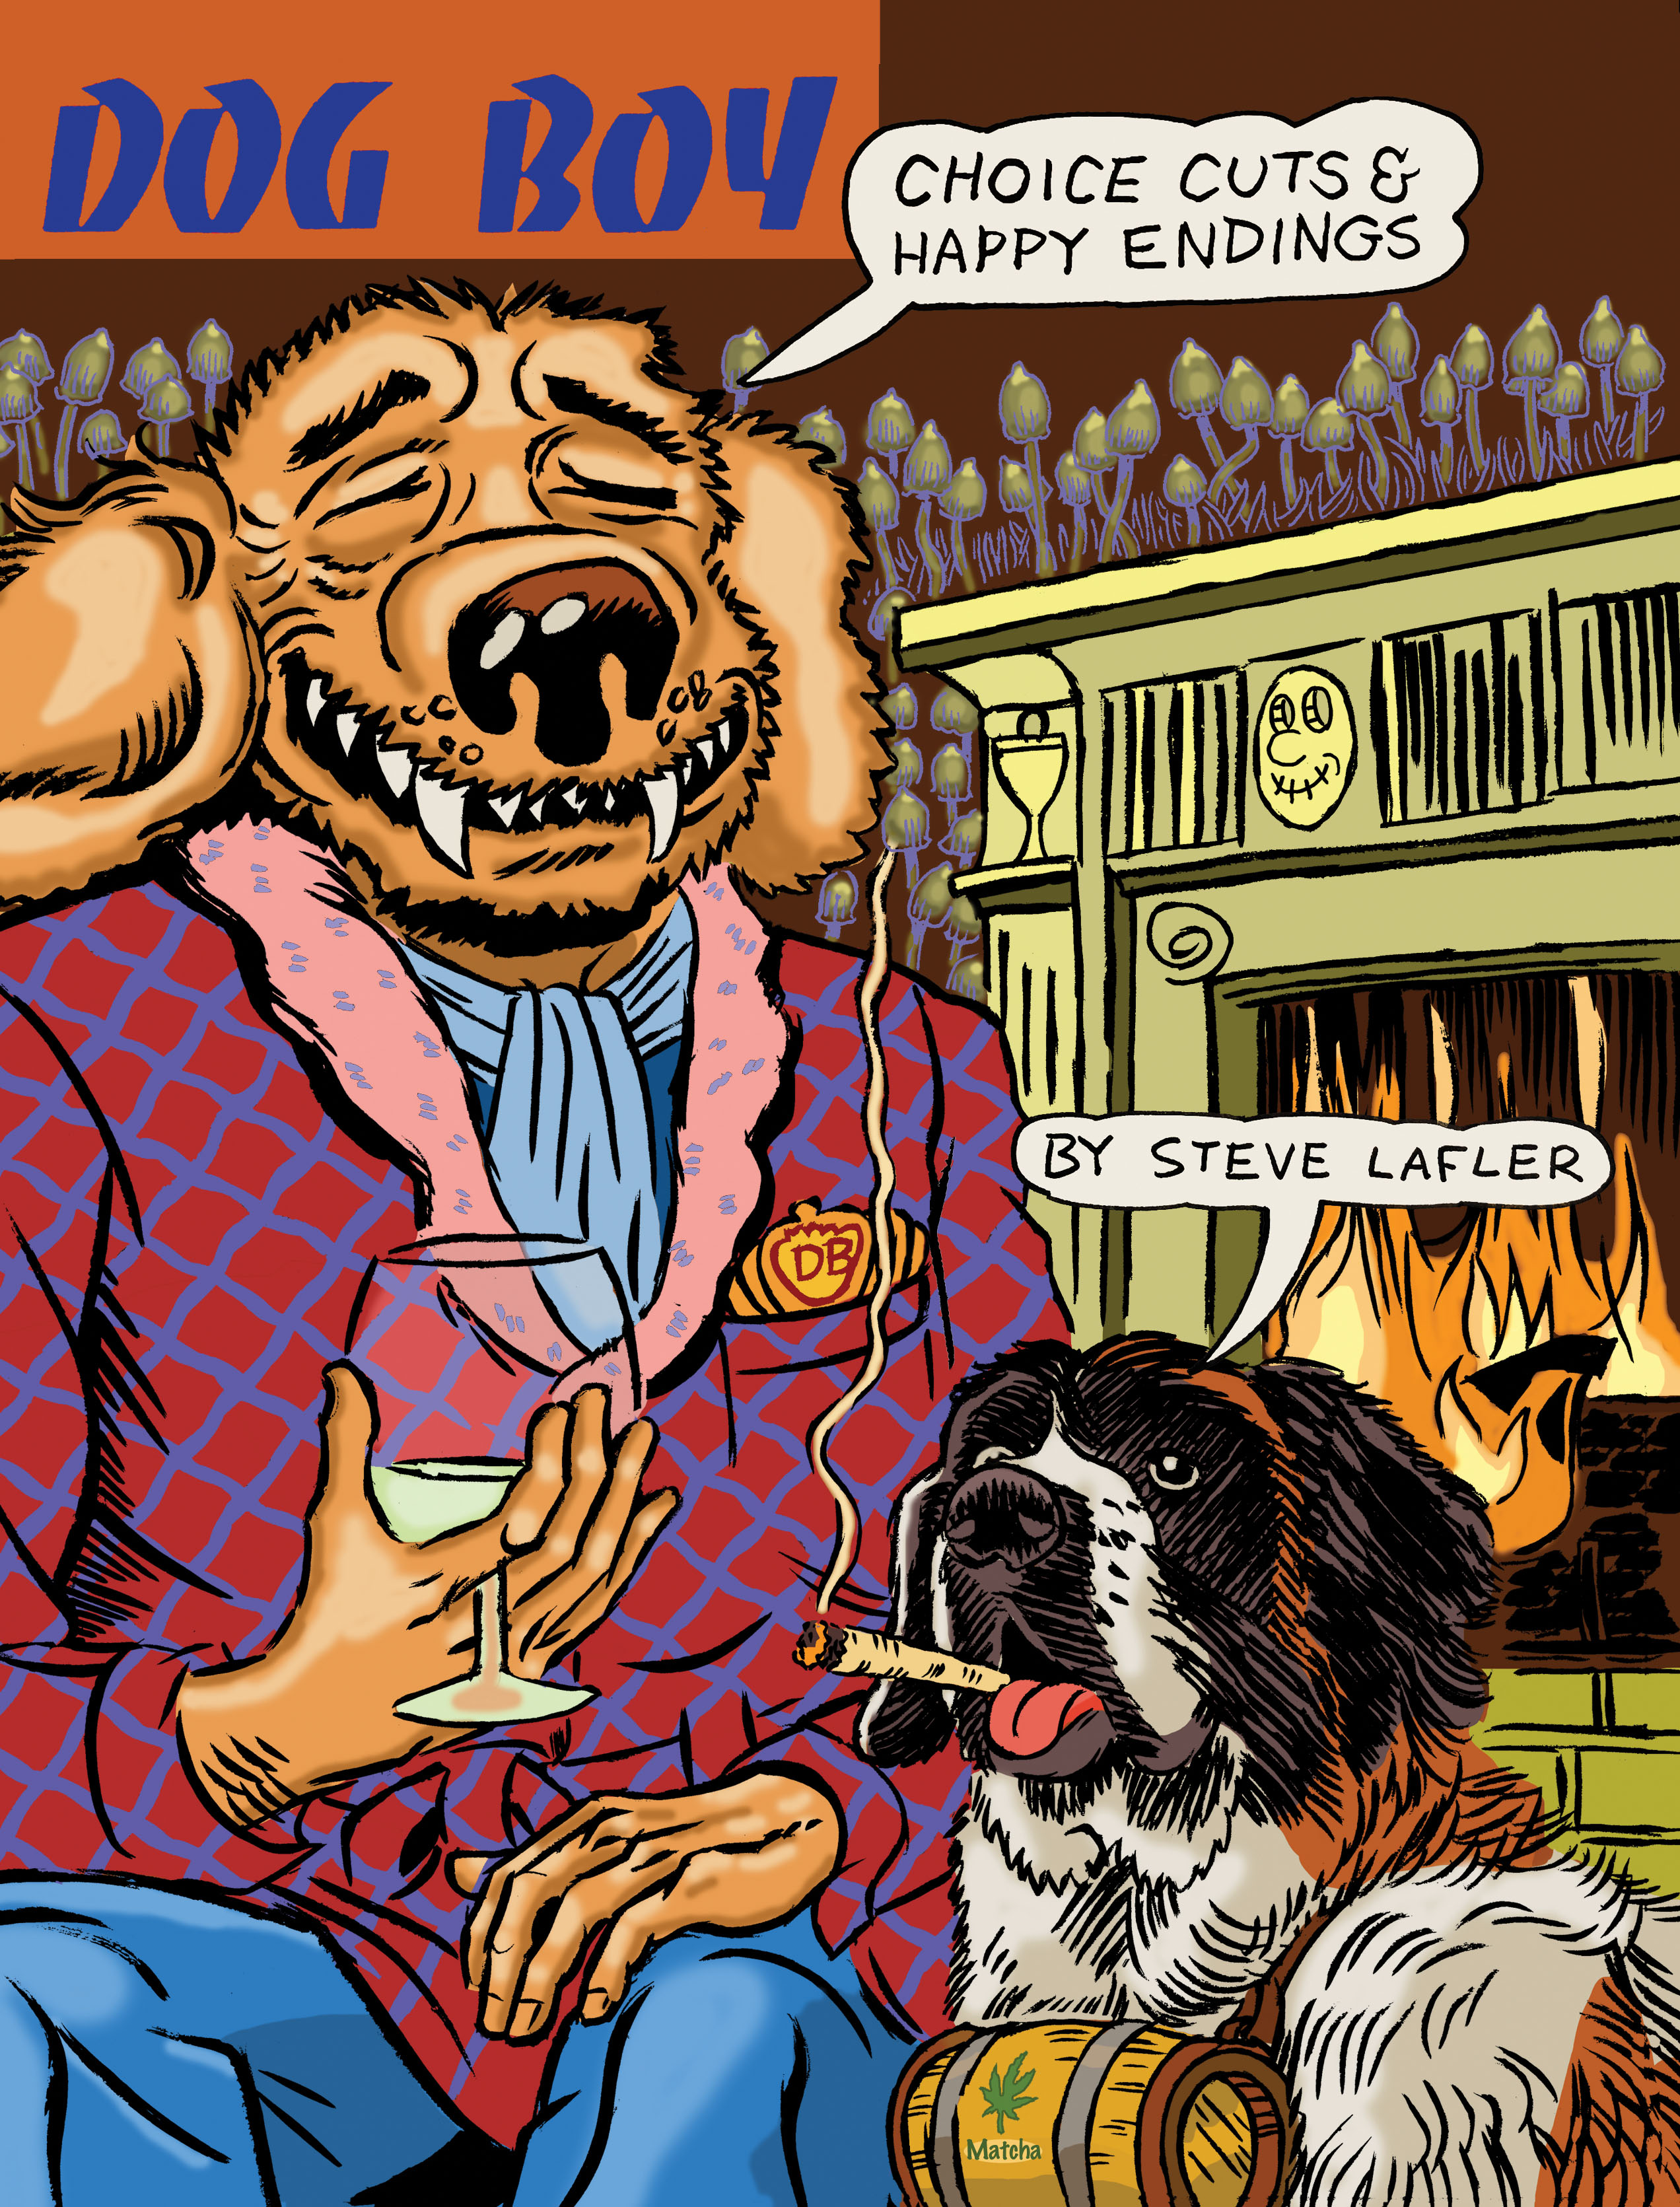 Dog Boy Graphic Novel Choice Cuts And Happy Endings